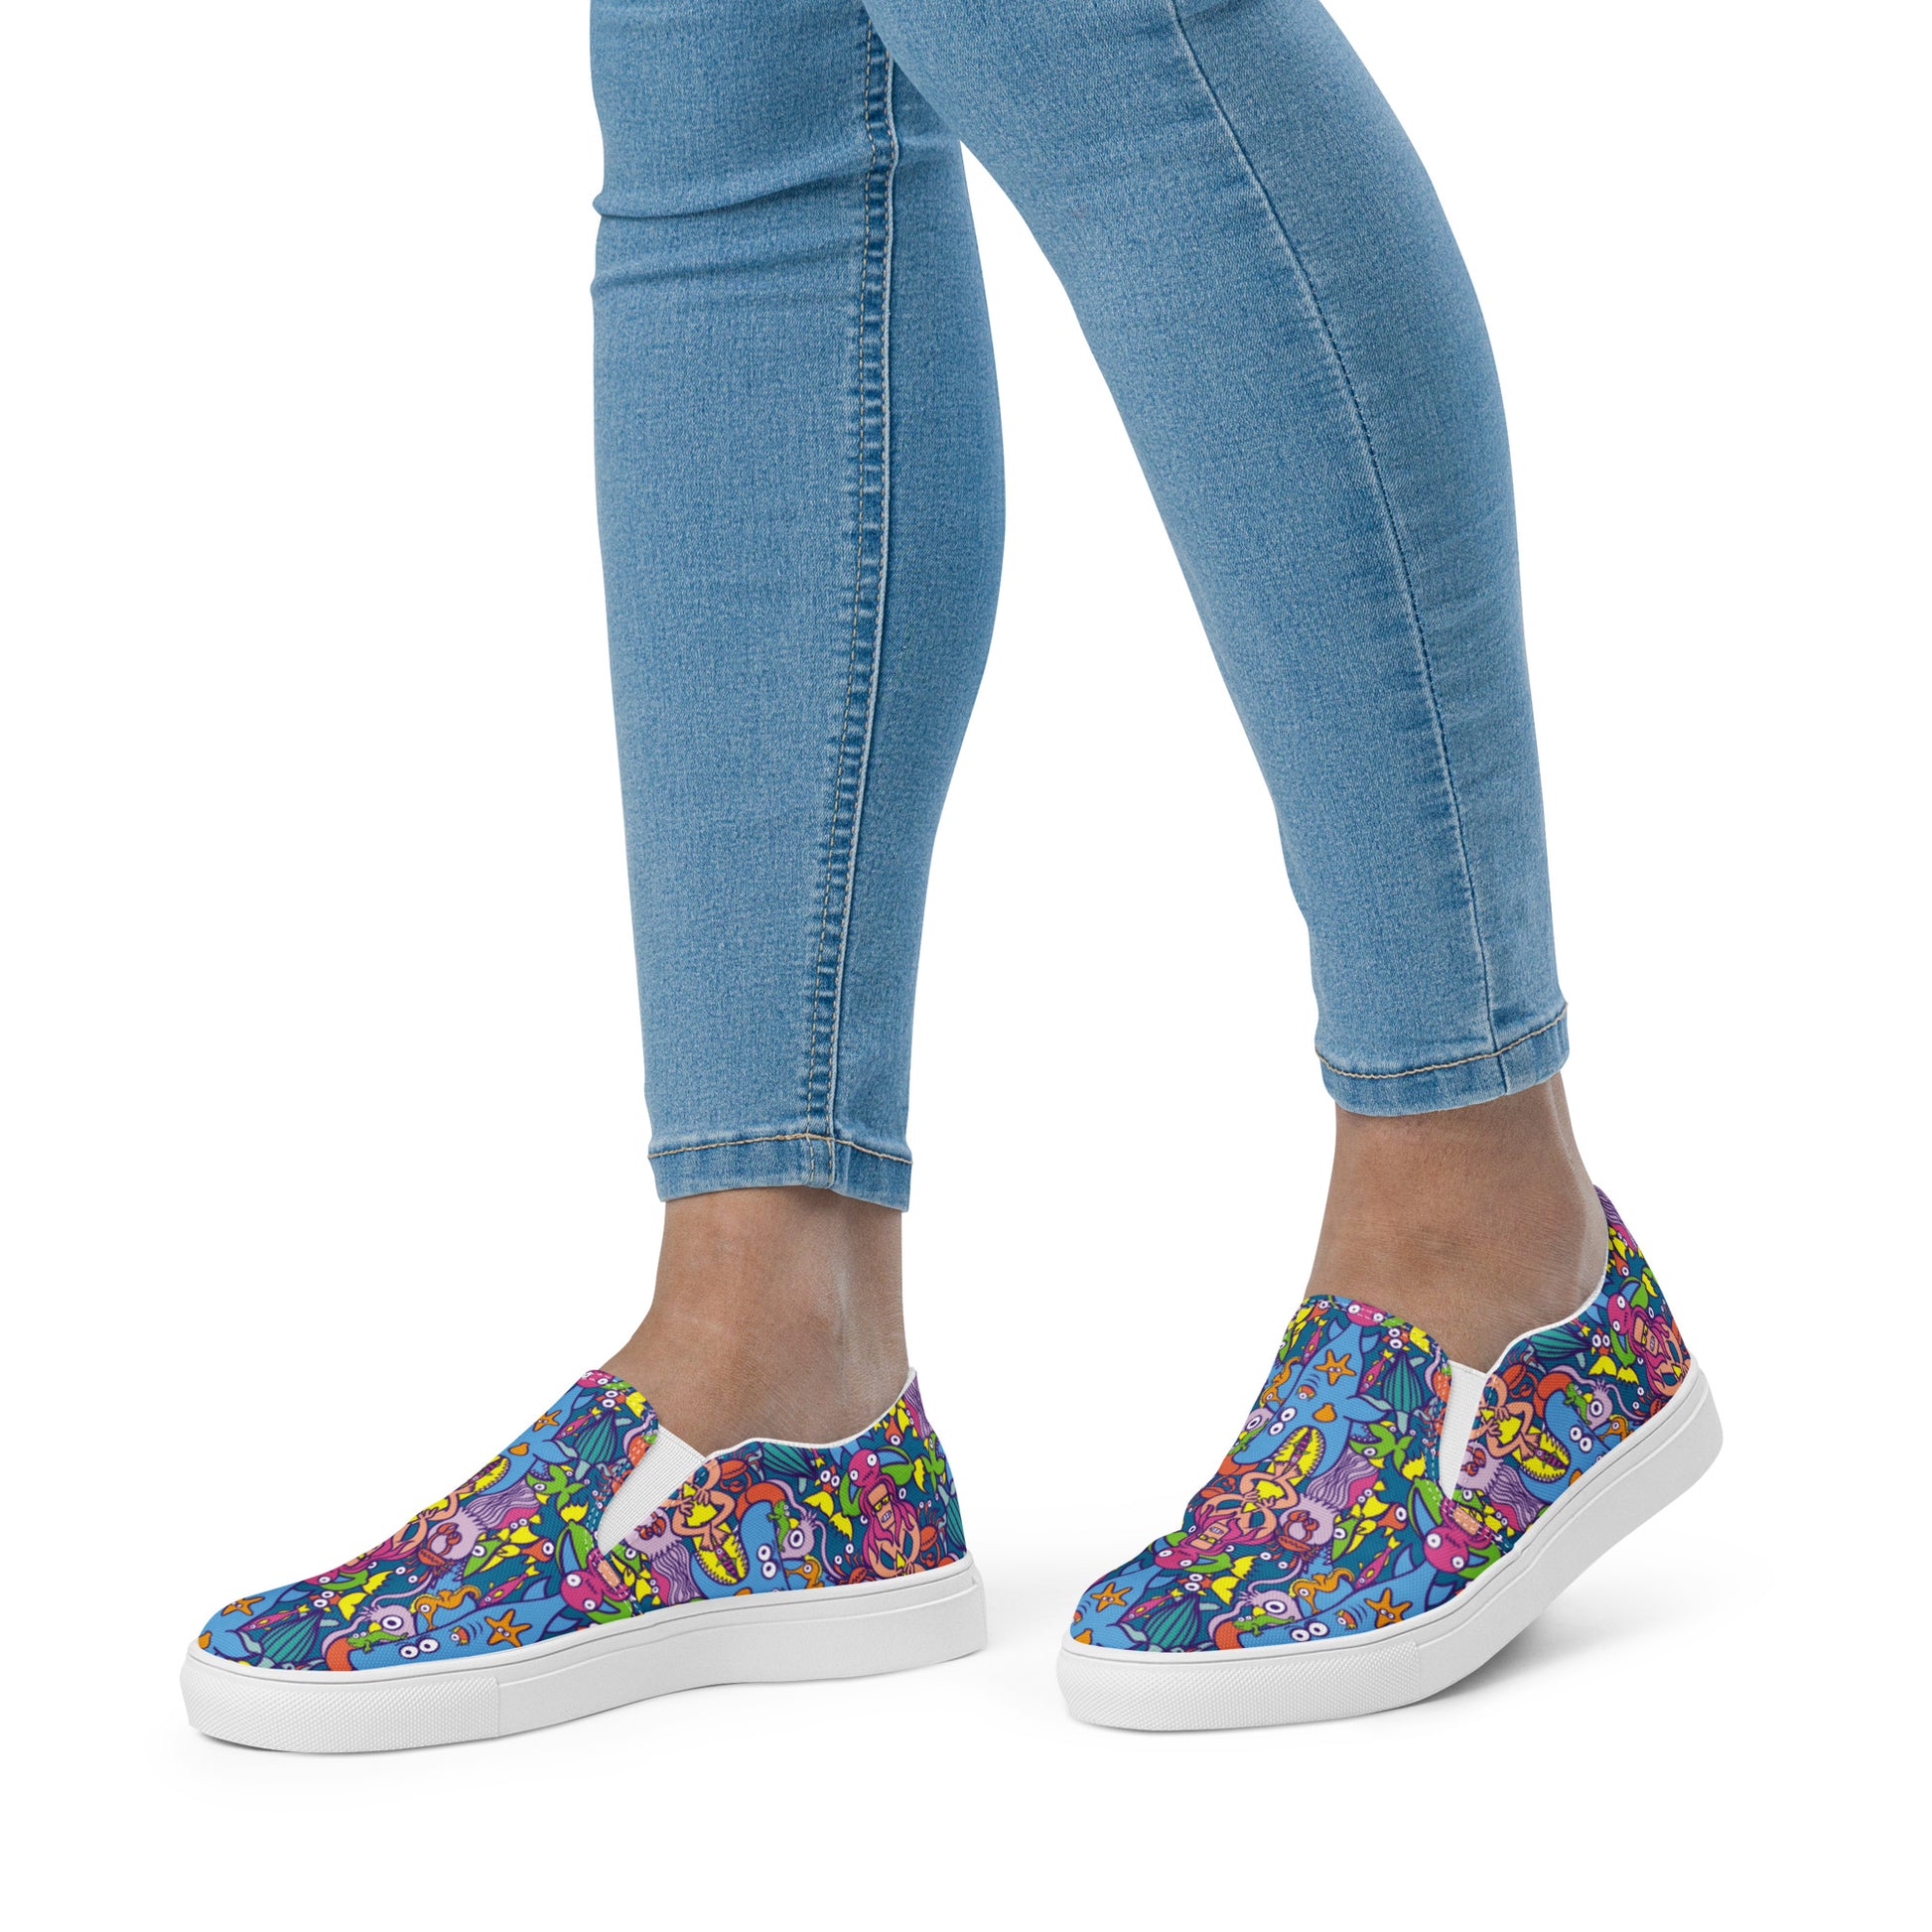 Surf is a true extreme sport Women’s slip-on canvas shoes. Lifestyle